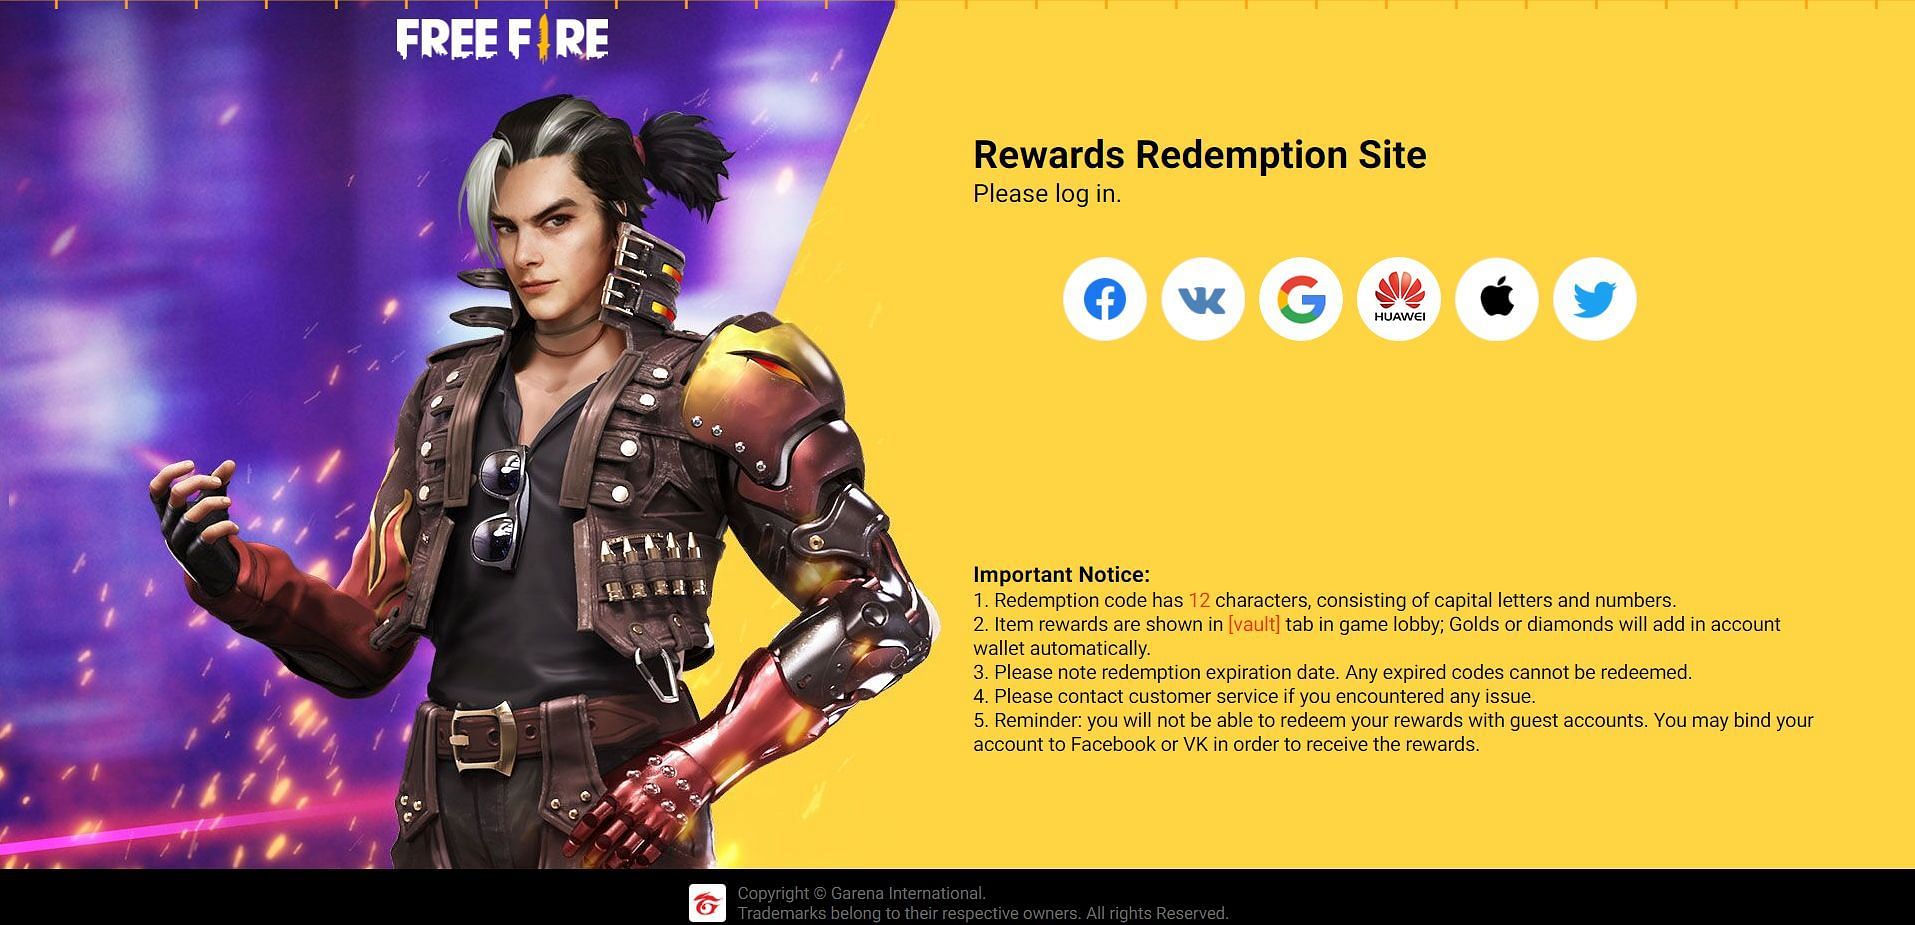 Redeem codes appear as one of the methods by which diamonds can be obtained (Image via Free Fire)